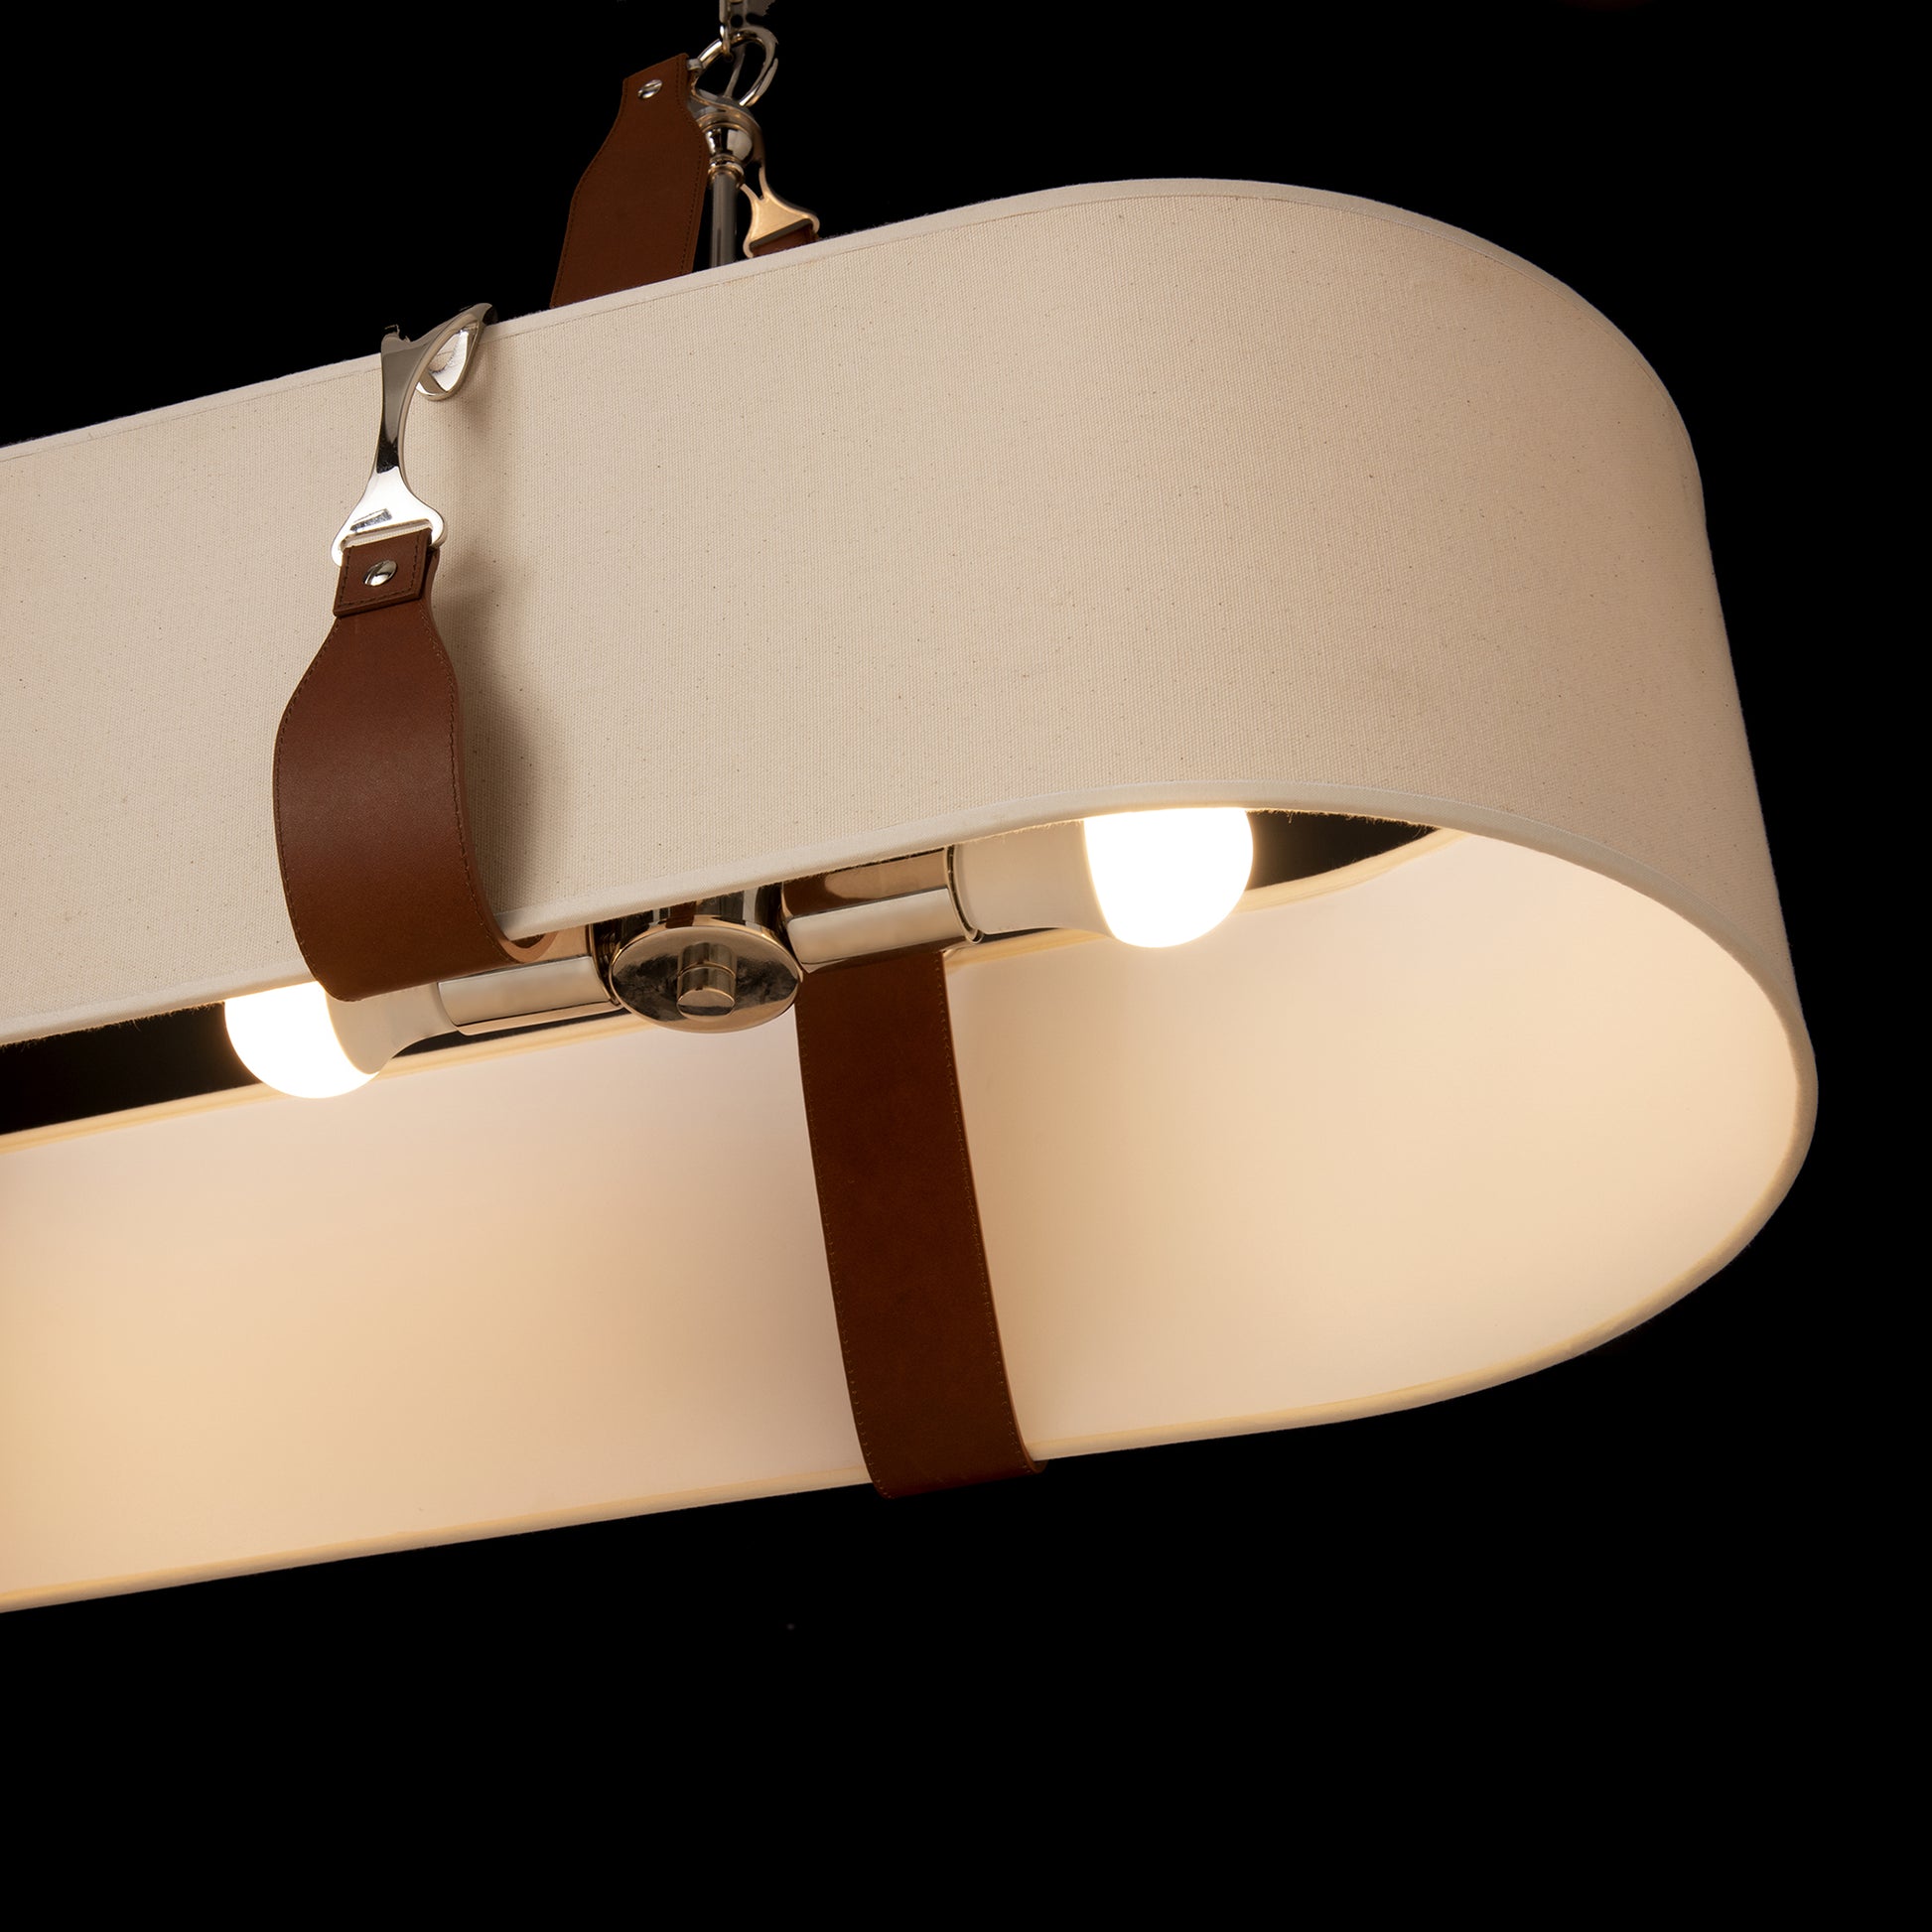 Close-up view of a Hubbardton Forge Saratoga Oval Pendant chandelier with an off-white circular shade held by leather straps, illuminated by several bulbs inside, set against a dark background.